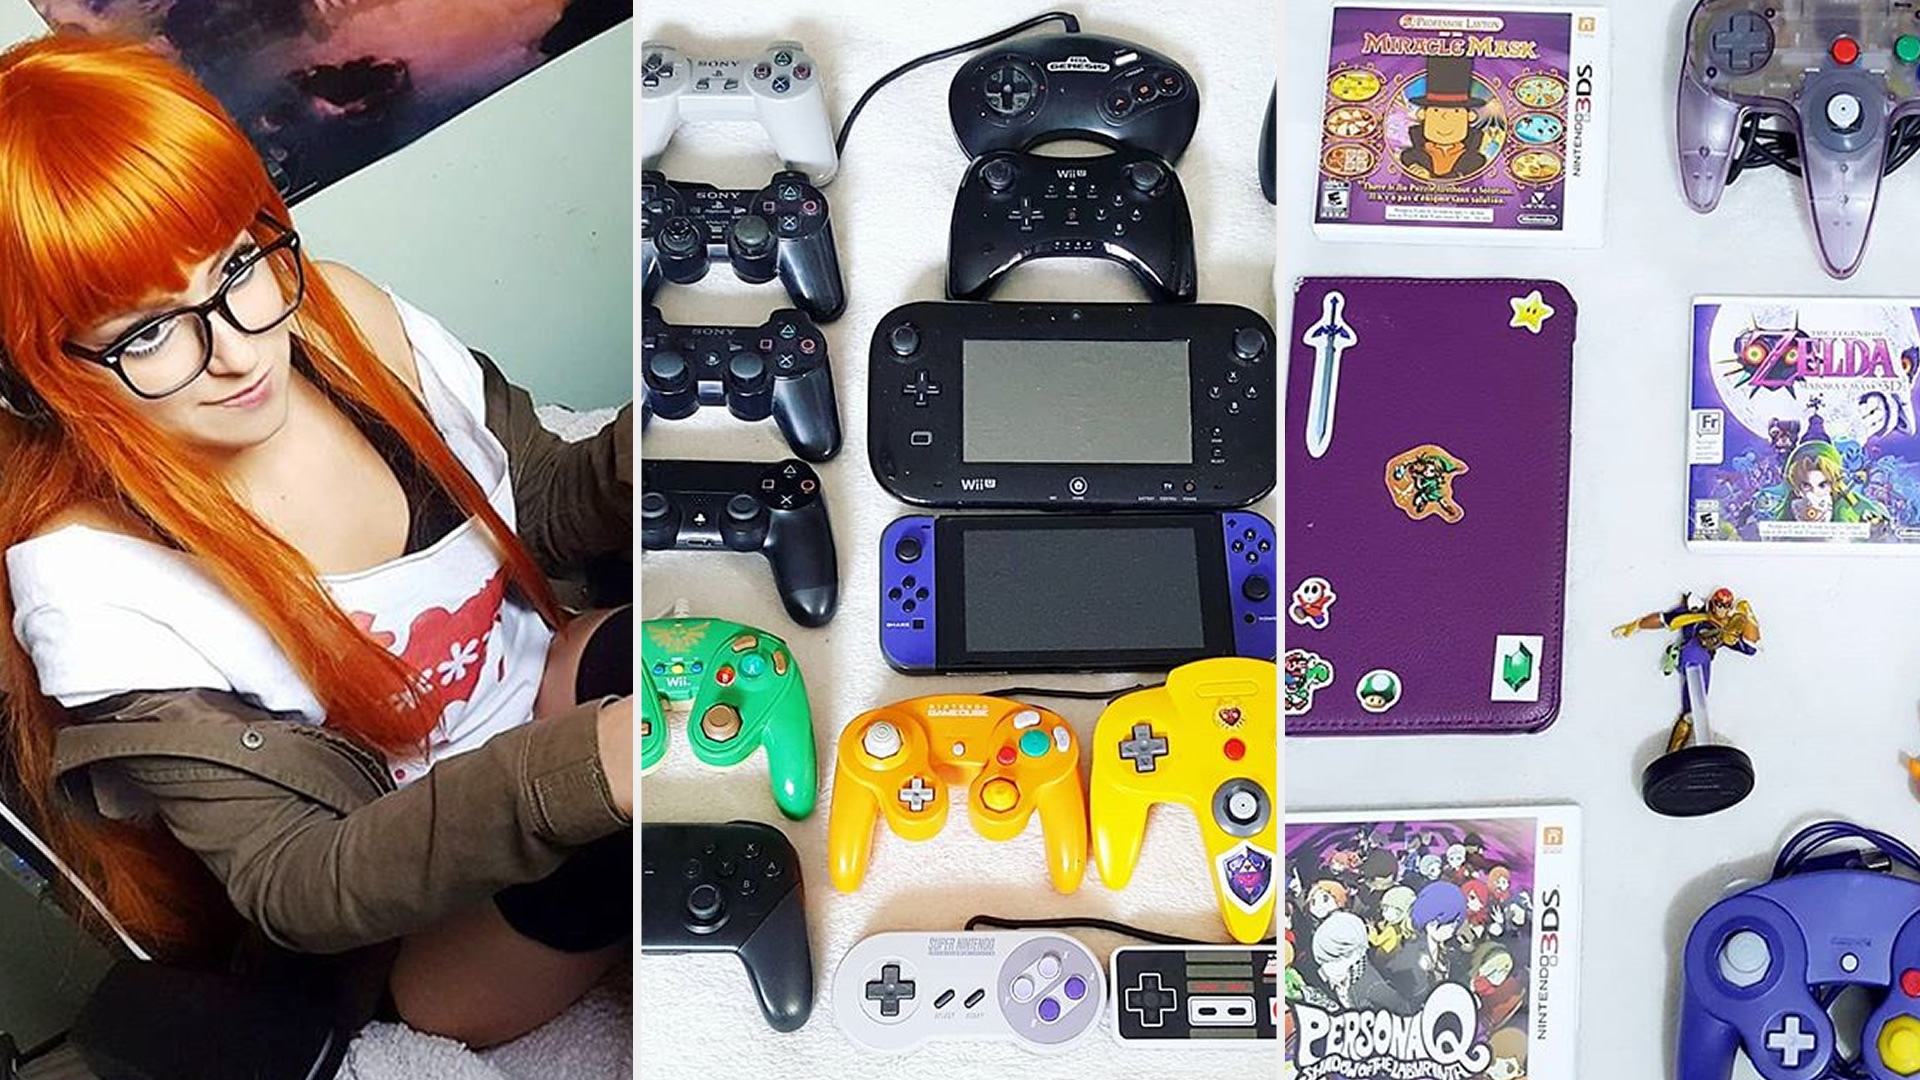 Interview: @the_jazzykitten on Game Collecting, Cosplay and Pokemon Makeup